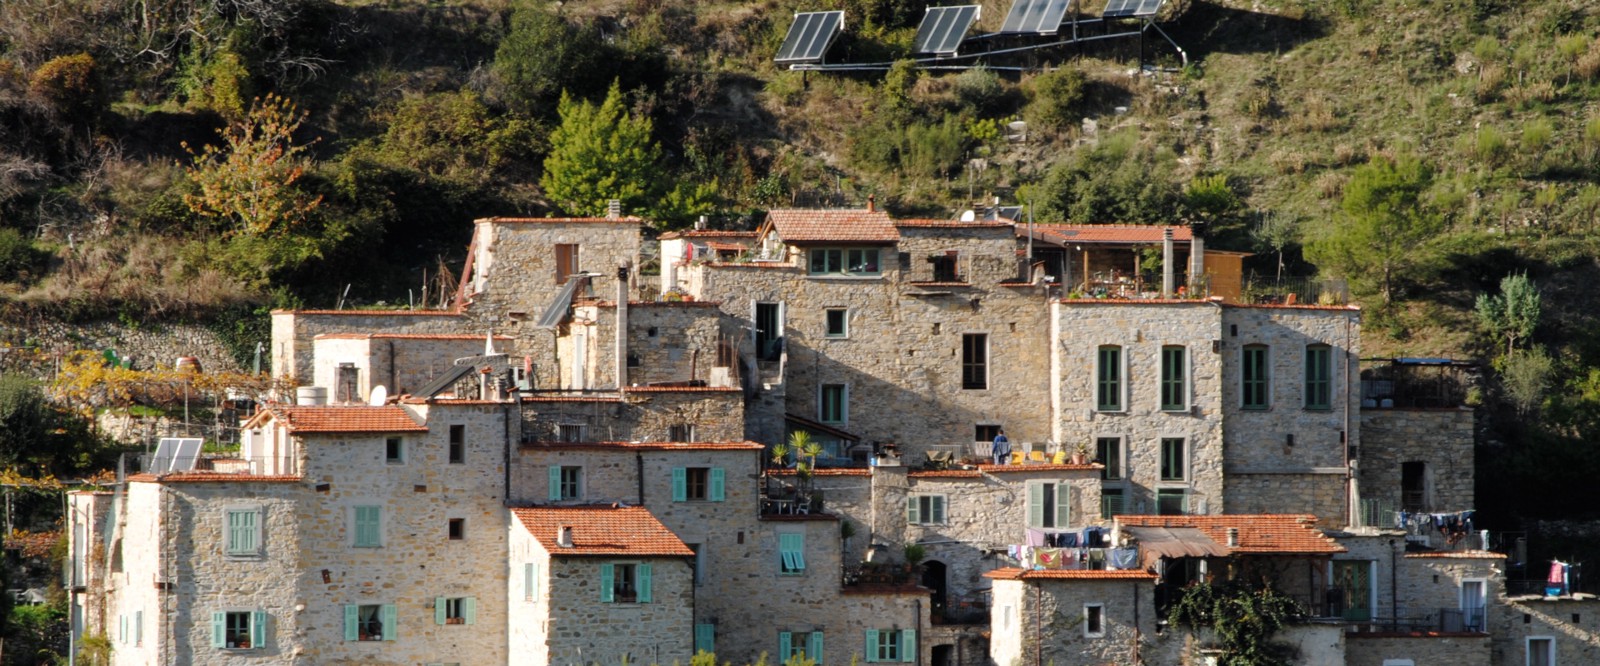 A view of the Ecovillage Torri Superiore in Italy, featuring a cluster of eco-friendly homes surrounded by rolling hills and forests